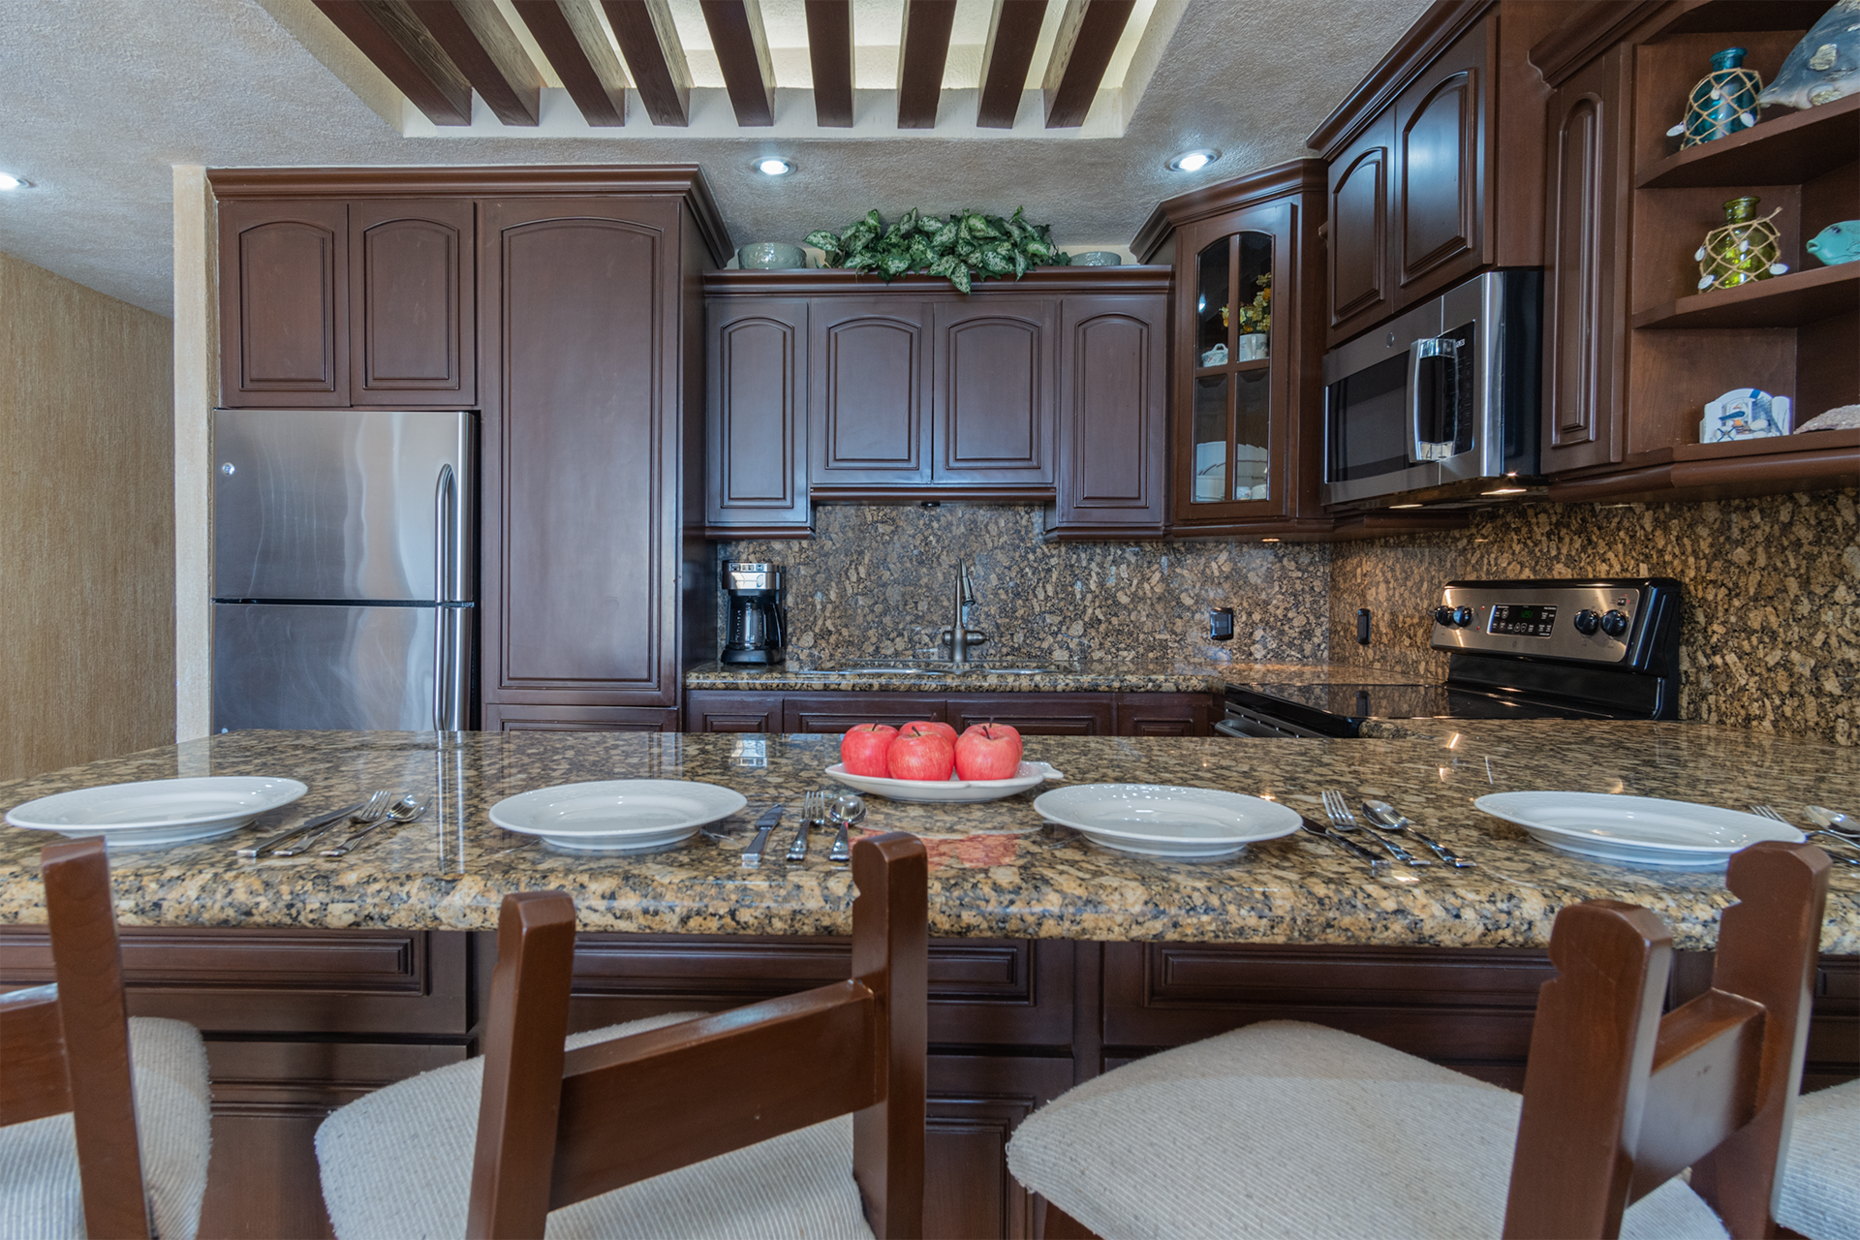 The charming kitchen with visas overhead and fine wooden cabinets.